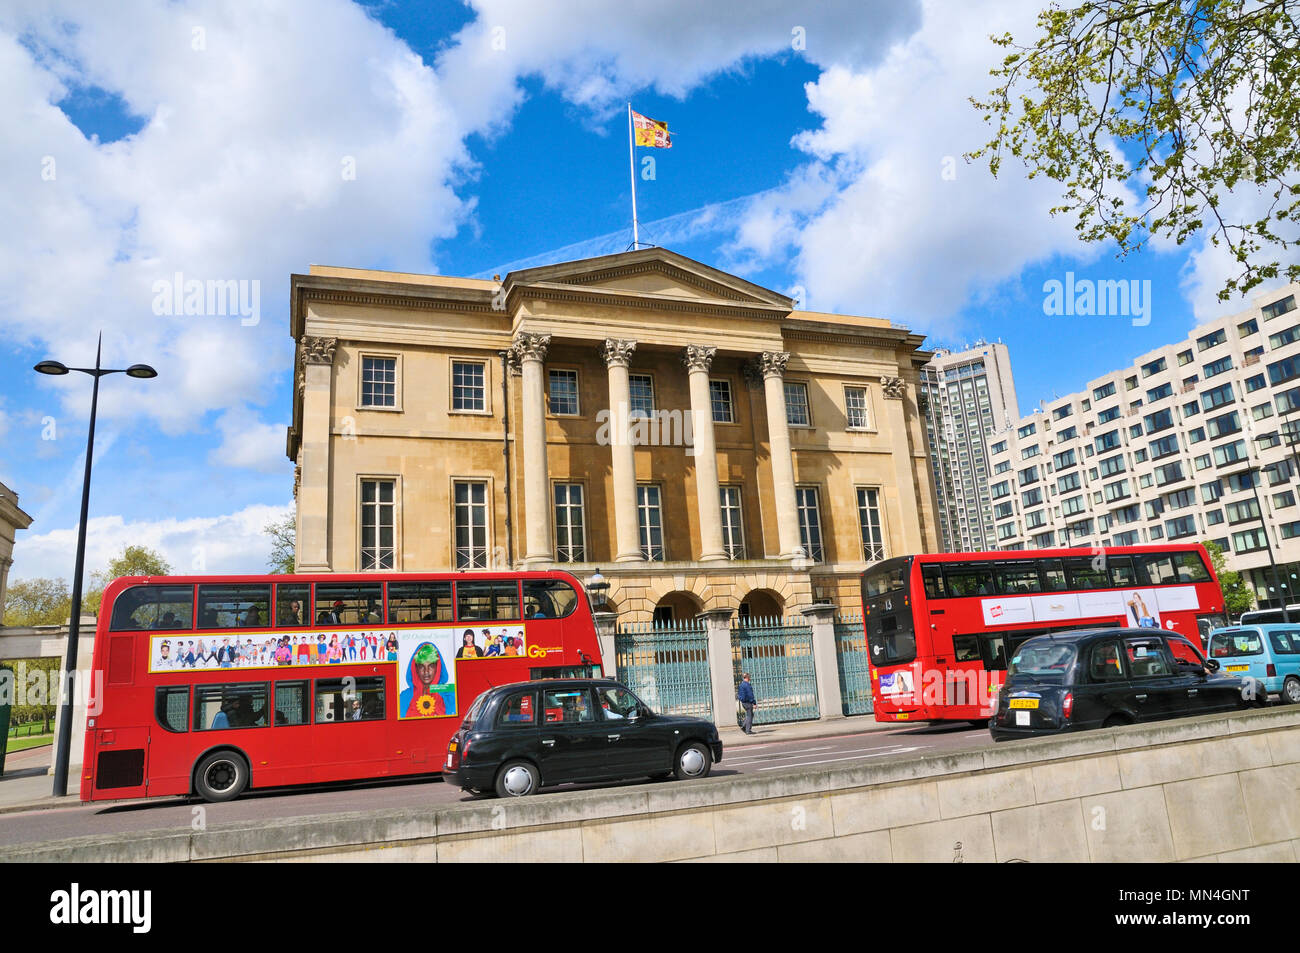 Apsley House, 149 Piccadilly, Hyde Park Corner, Westminster, London, England, Regno Unito Foto Stock